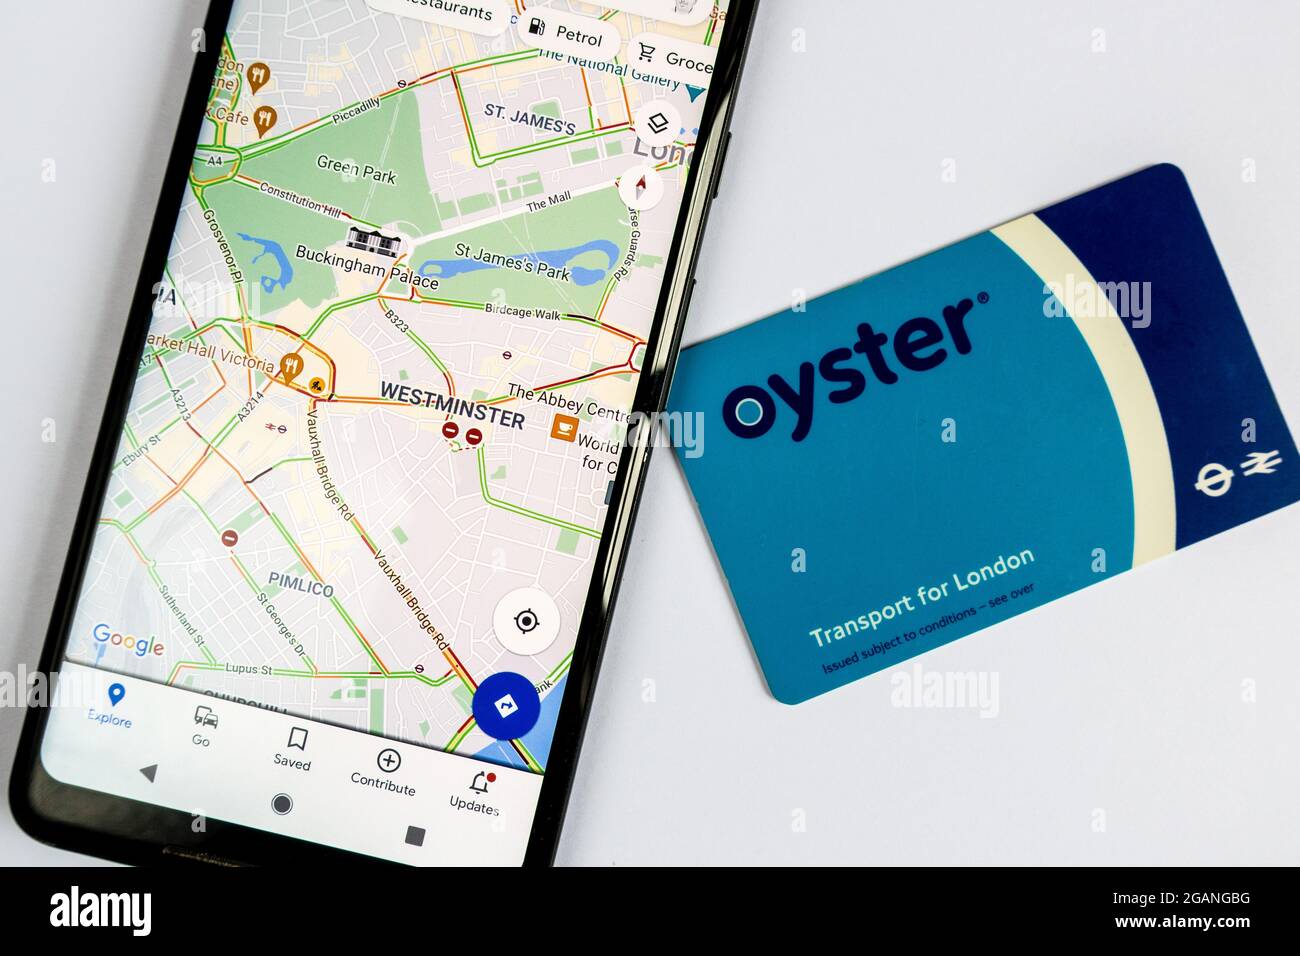 Google maps on smartphone and Oyster card the Transport for London travel card Stock Photo